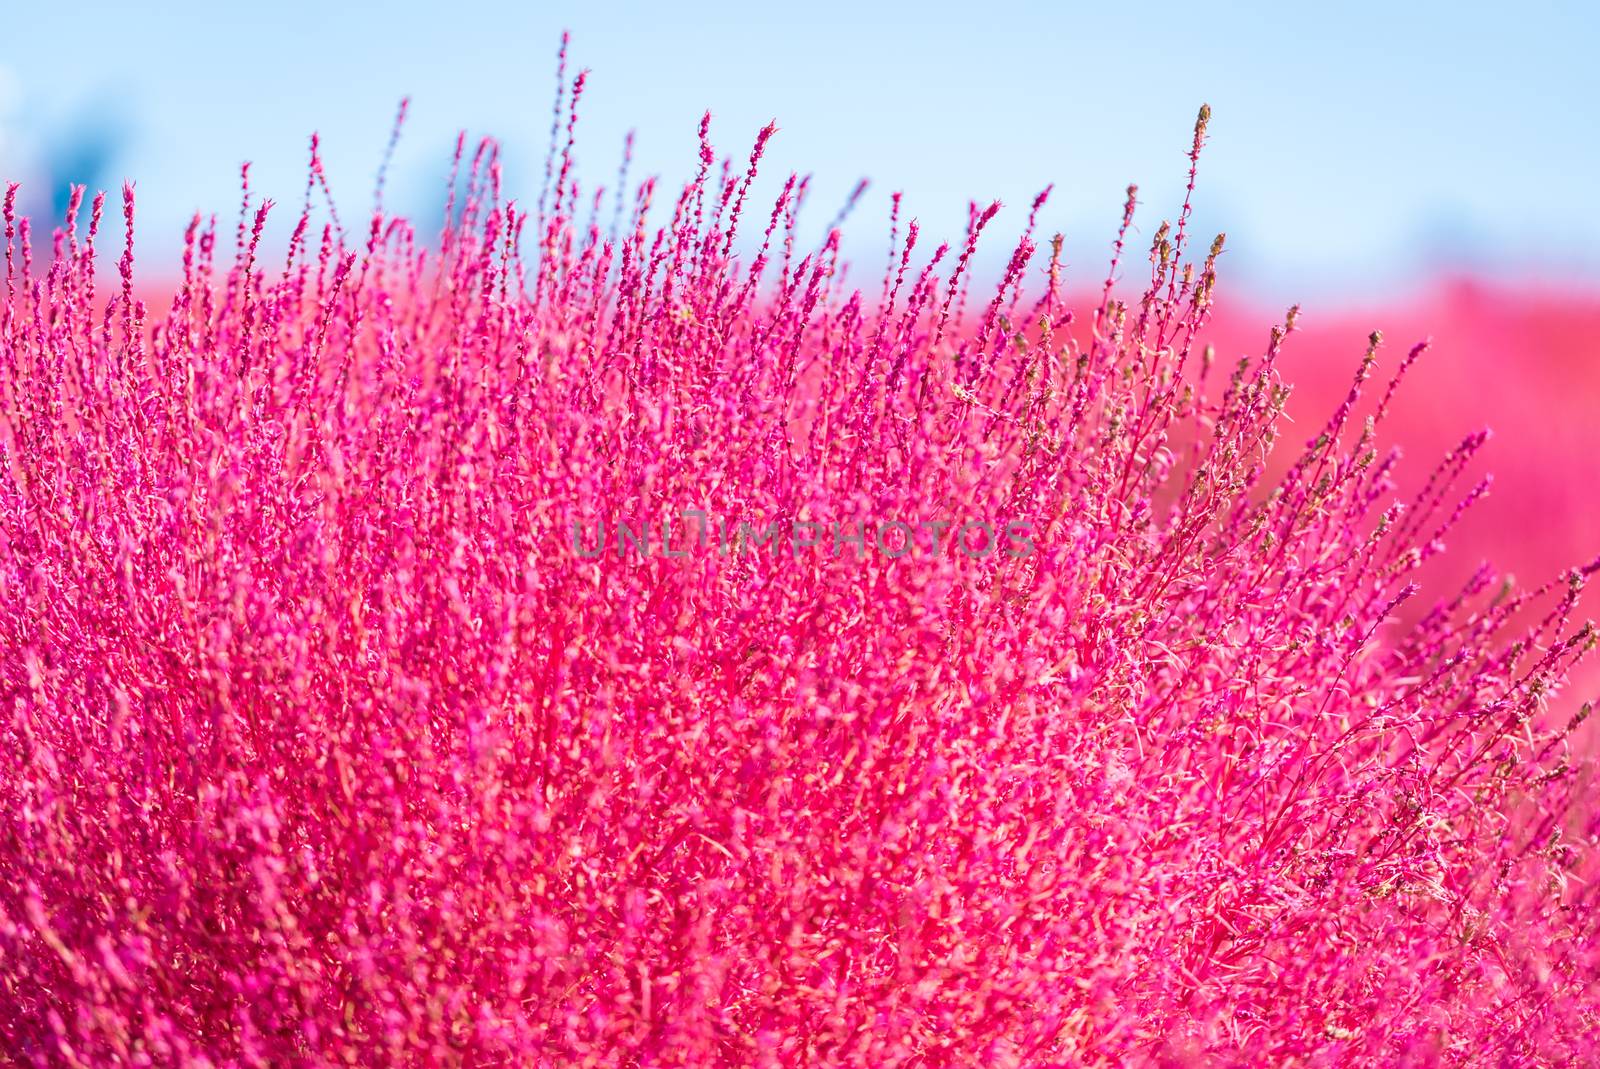 Kochia and cosmos bush with hill landscape Mountain,at Hitachi Seaside Park in autumn with blue sky at Ibaraki, Japan